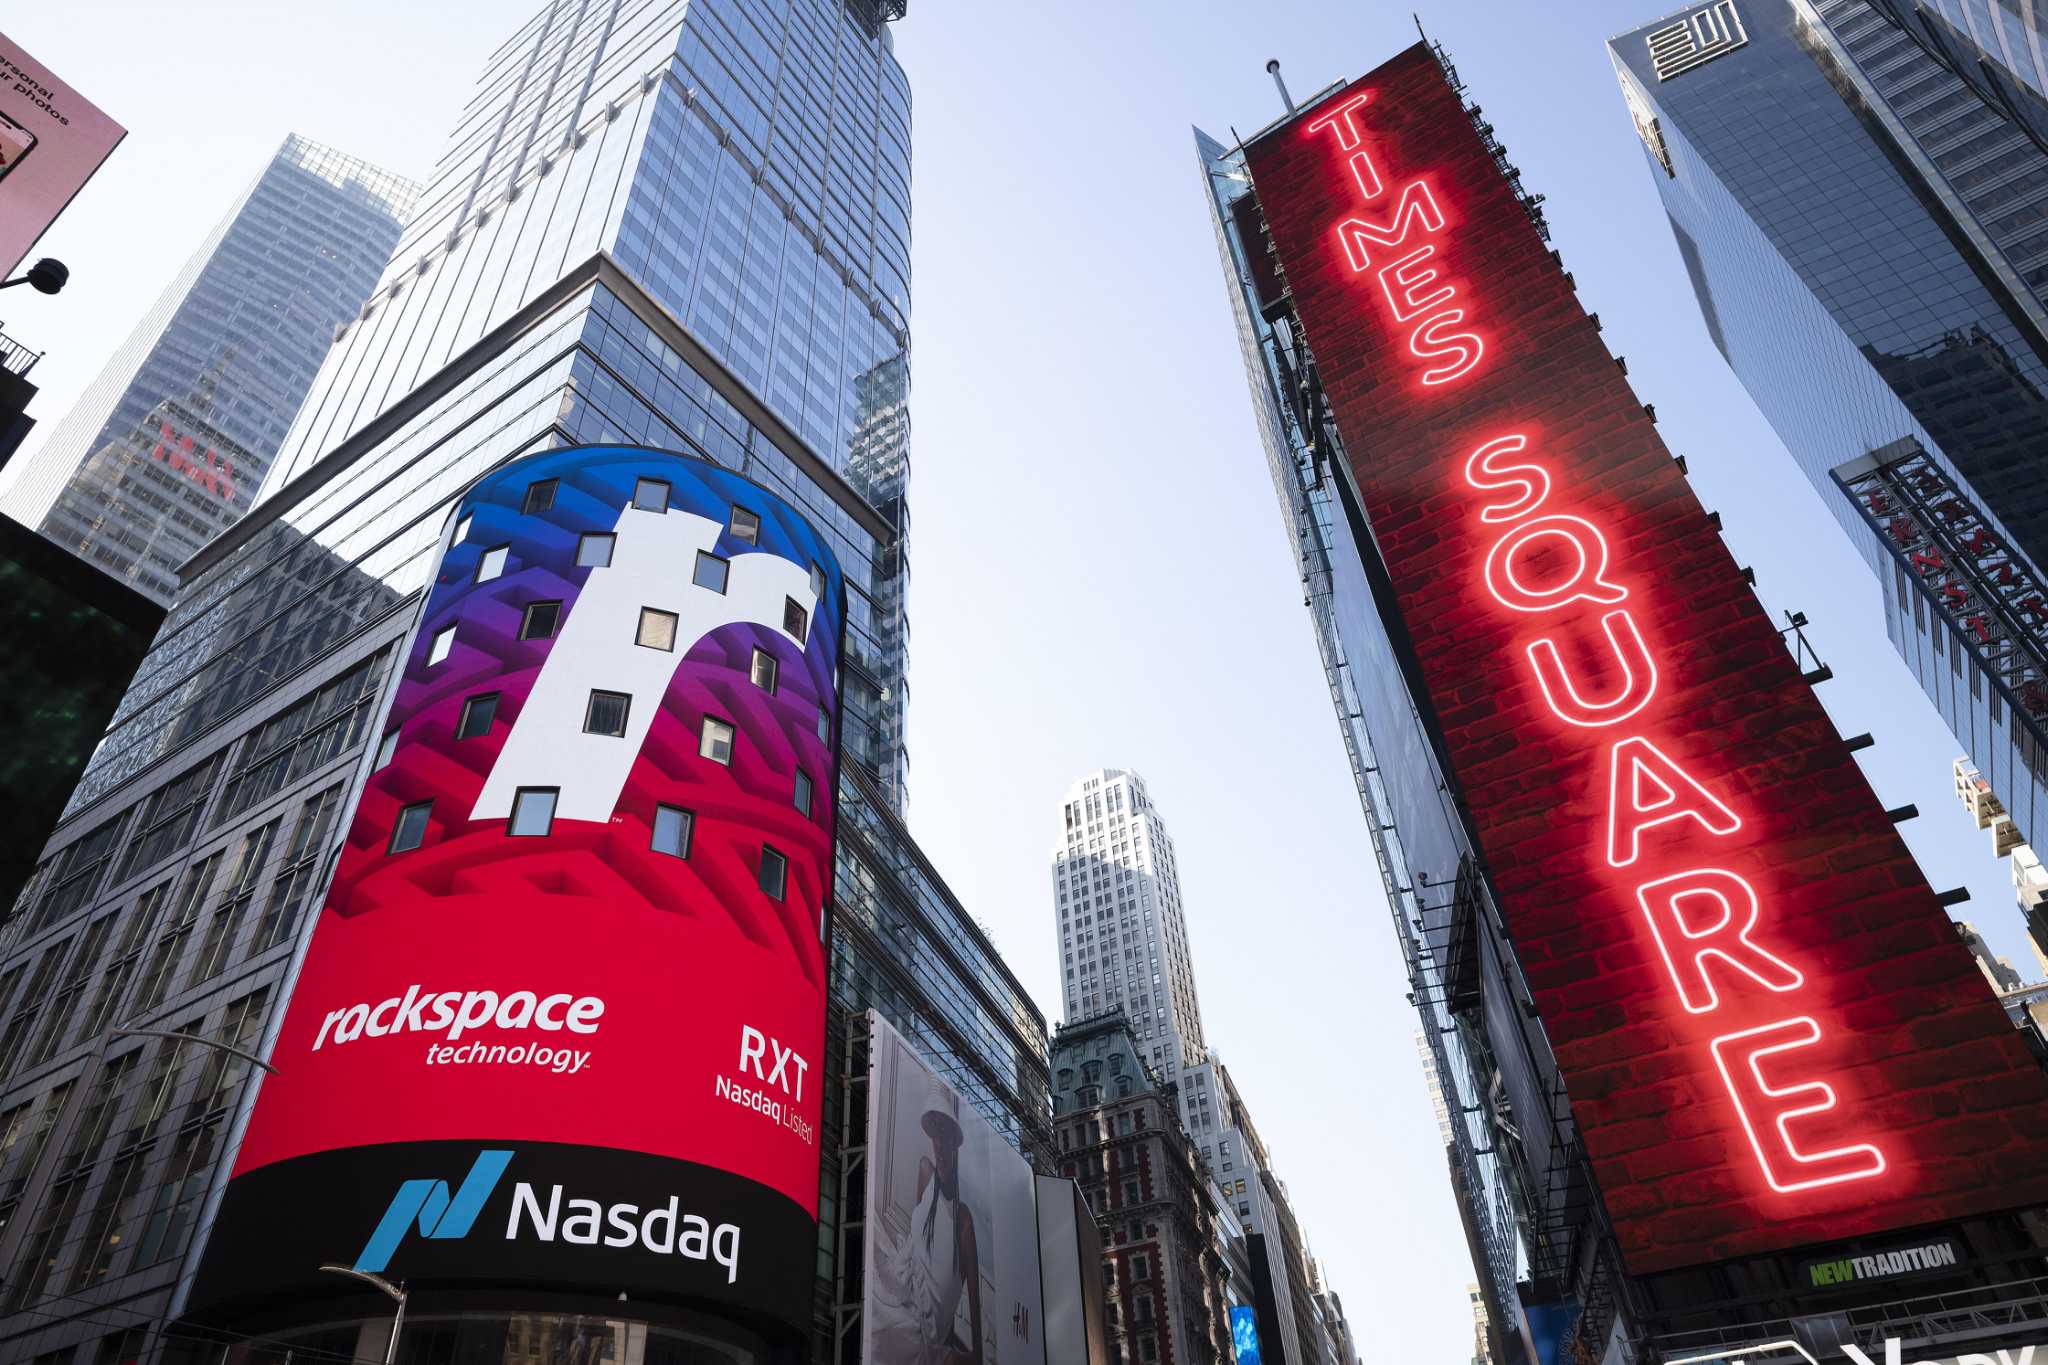 Cloud computing company Rackspace begins trading at the Nasdaq following its initial public offering, Wednesday, Aug. 5, 2020, in New York's Times Squ